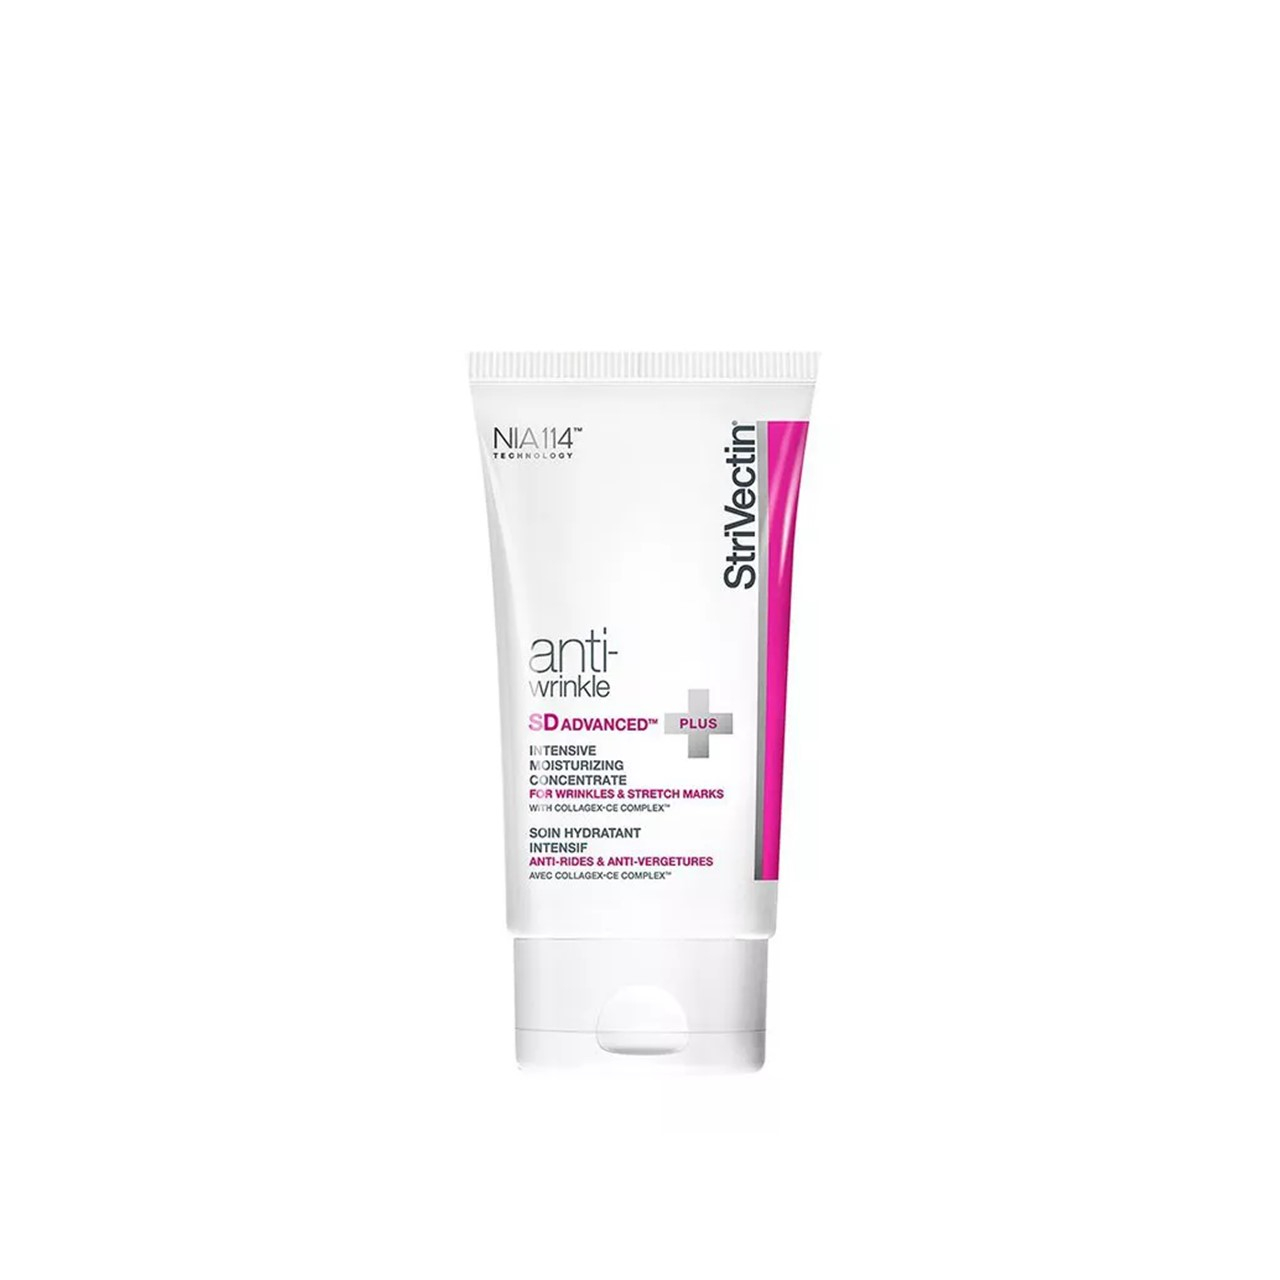 StriVectin SD Advanced Plus Intensive Moisturizing Concentrate 60ml